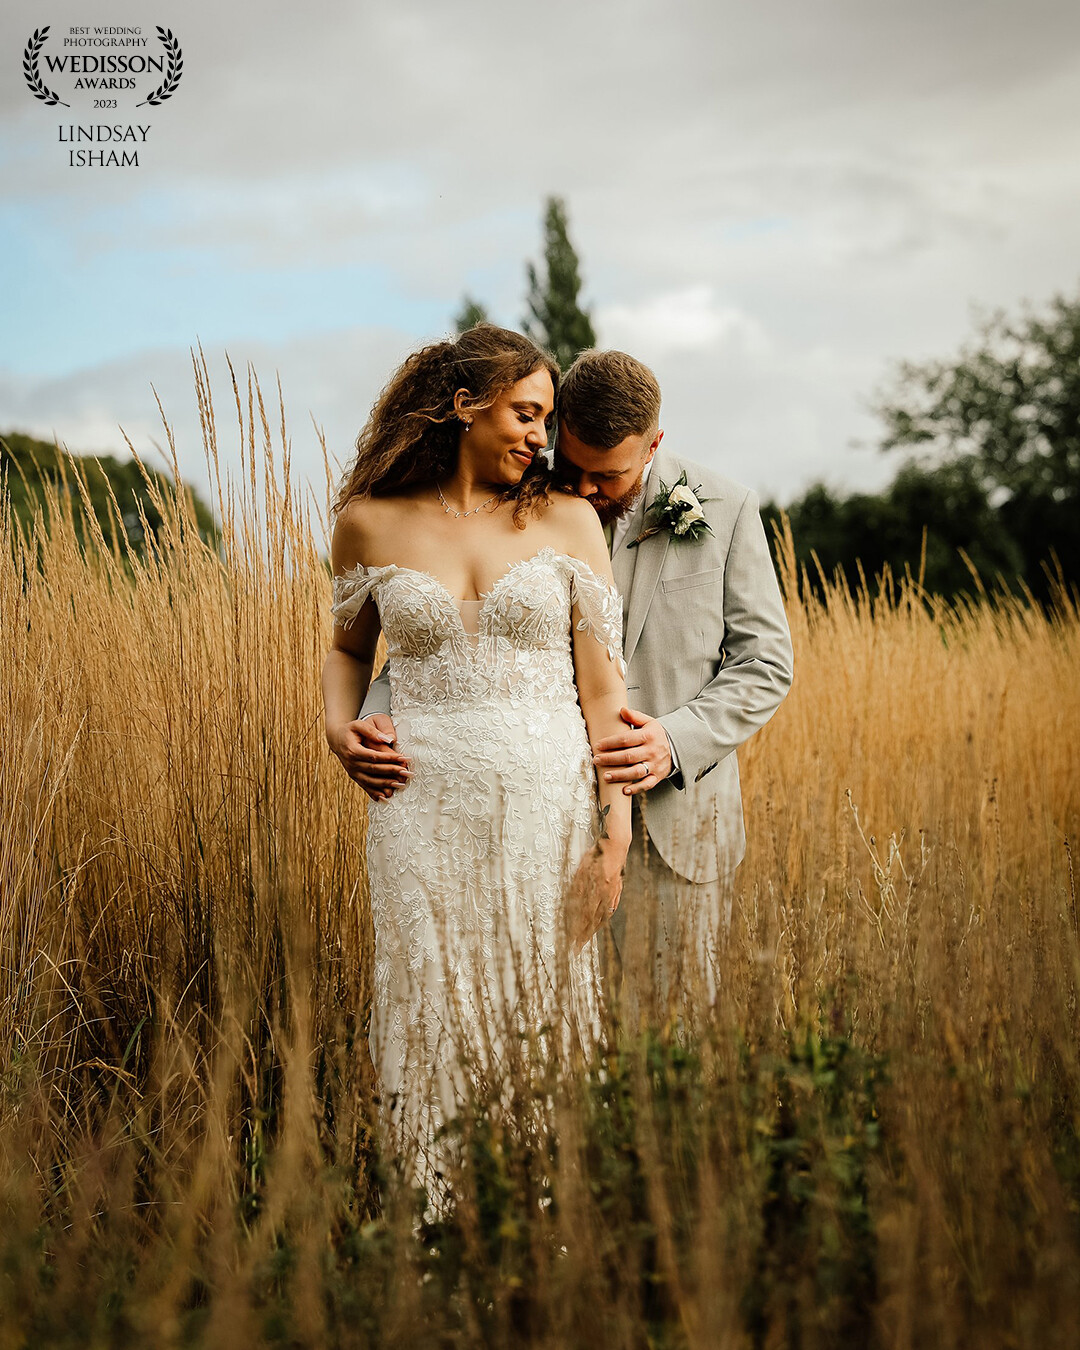 This day was simply glorious where Abbie & Jordan had the most perfect golden hour.  I loved getting them in amongst the gorgeous pampas grass at Elsham Hall.  The colours, the lighting set the scene perfectly.  And even though they may look "posed", this was just them being themselves.